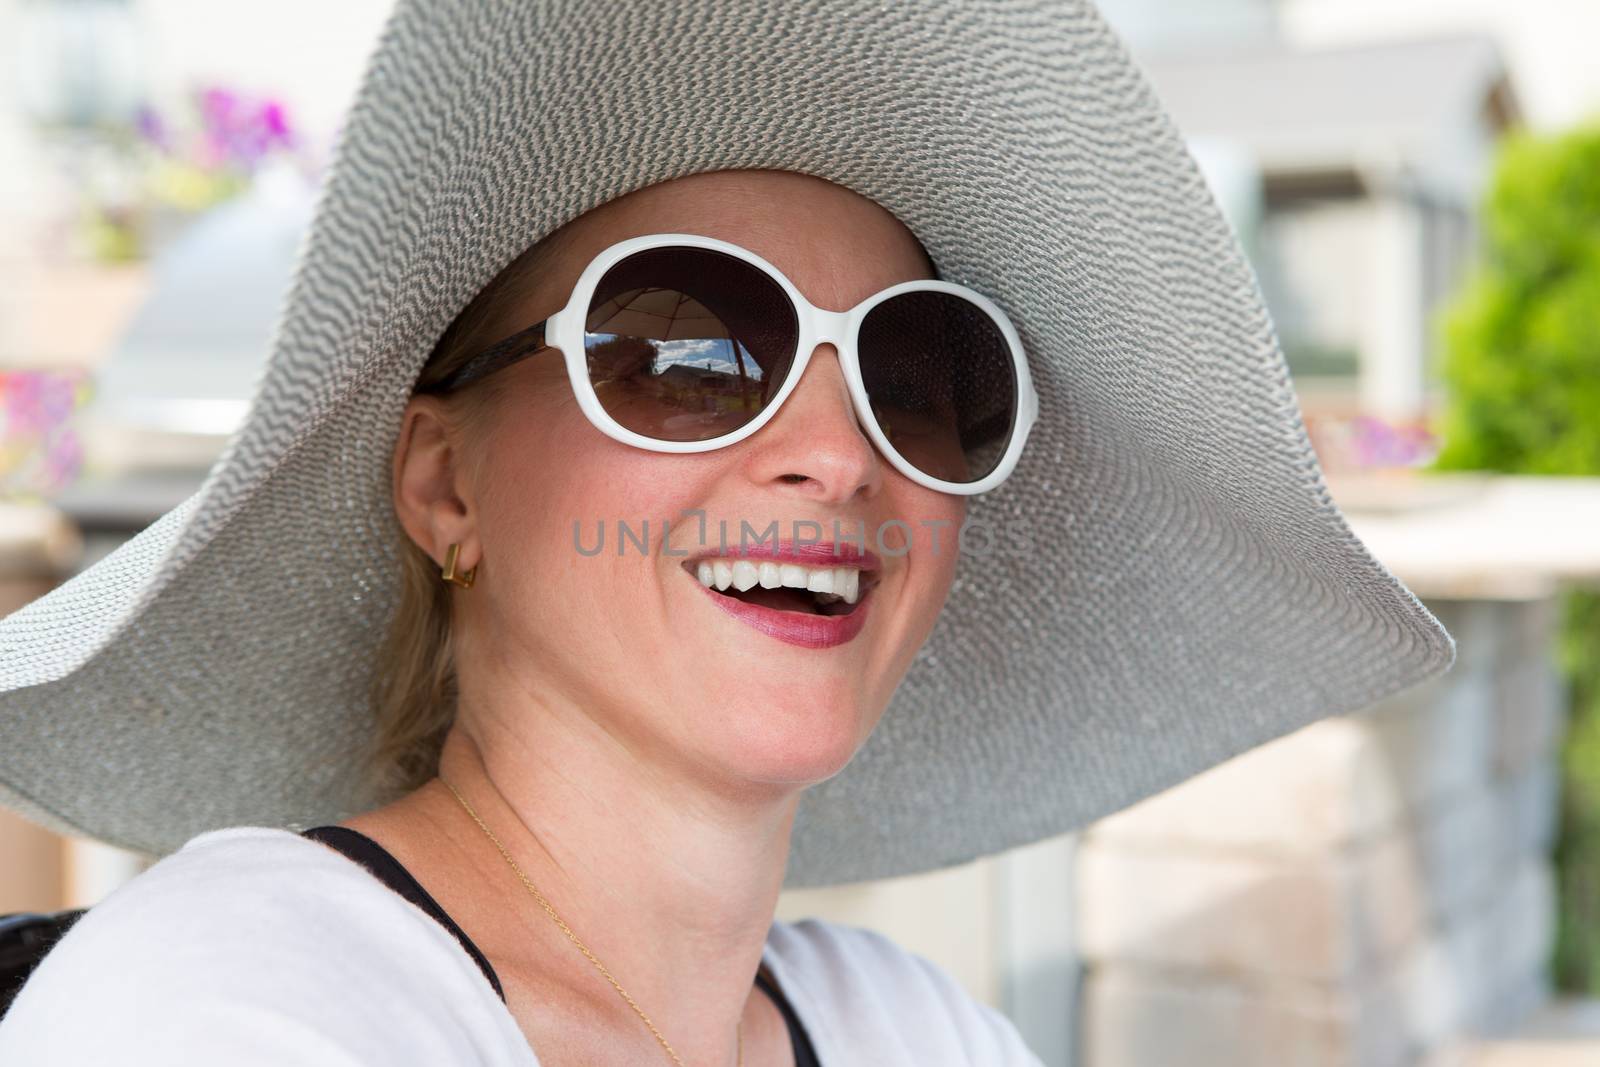 Head and Shoulders Close Up of Joyful Woman Wearing Large Brimmed Sun Hat and Sunglasses Laughing Outdoors on Backyard Patio on Sunny Day